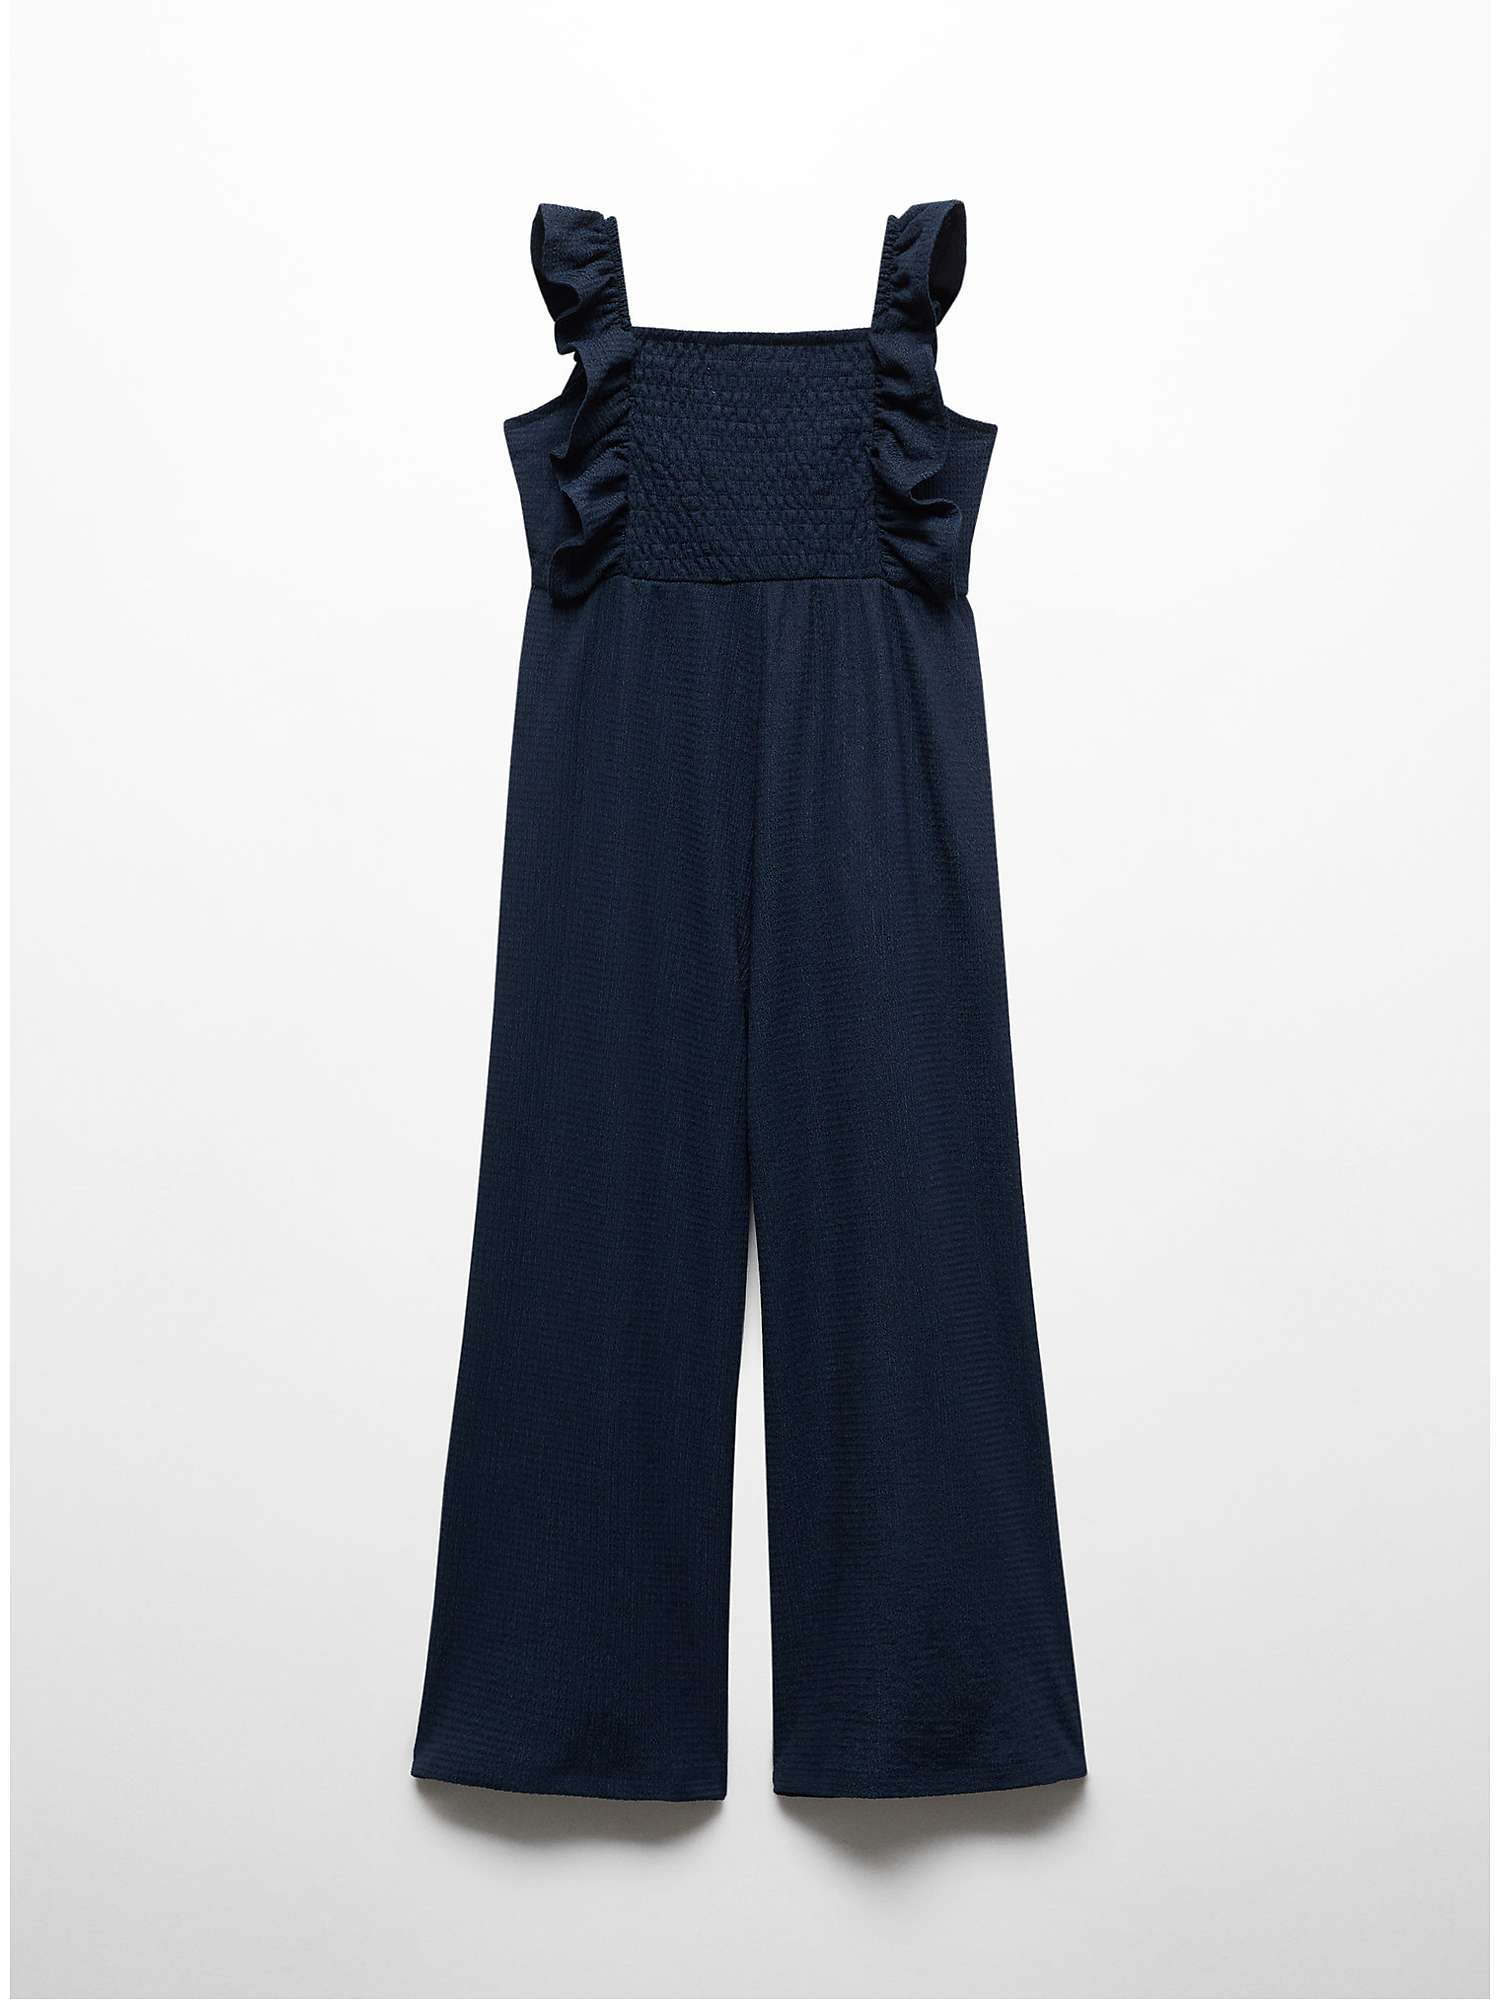 Buy Mango Kids' Crochi Embroidered Bodice Frill Jumpsuit, Navy Online at johnlewis.com